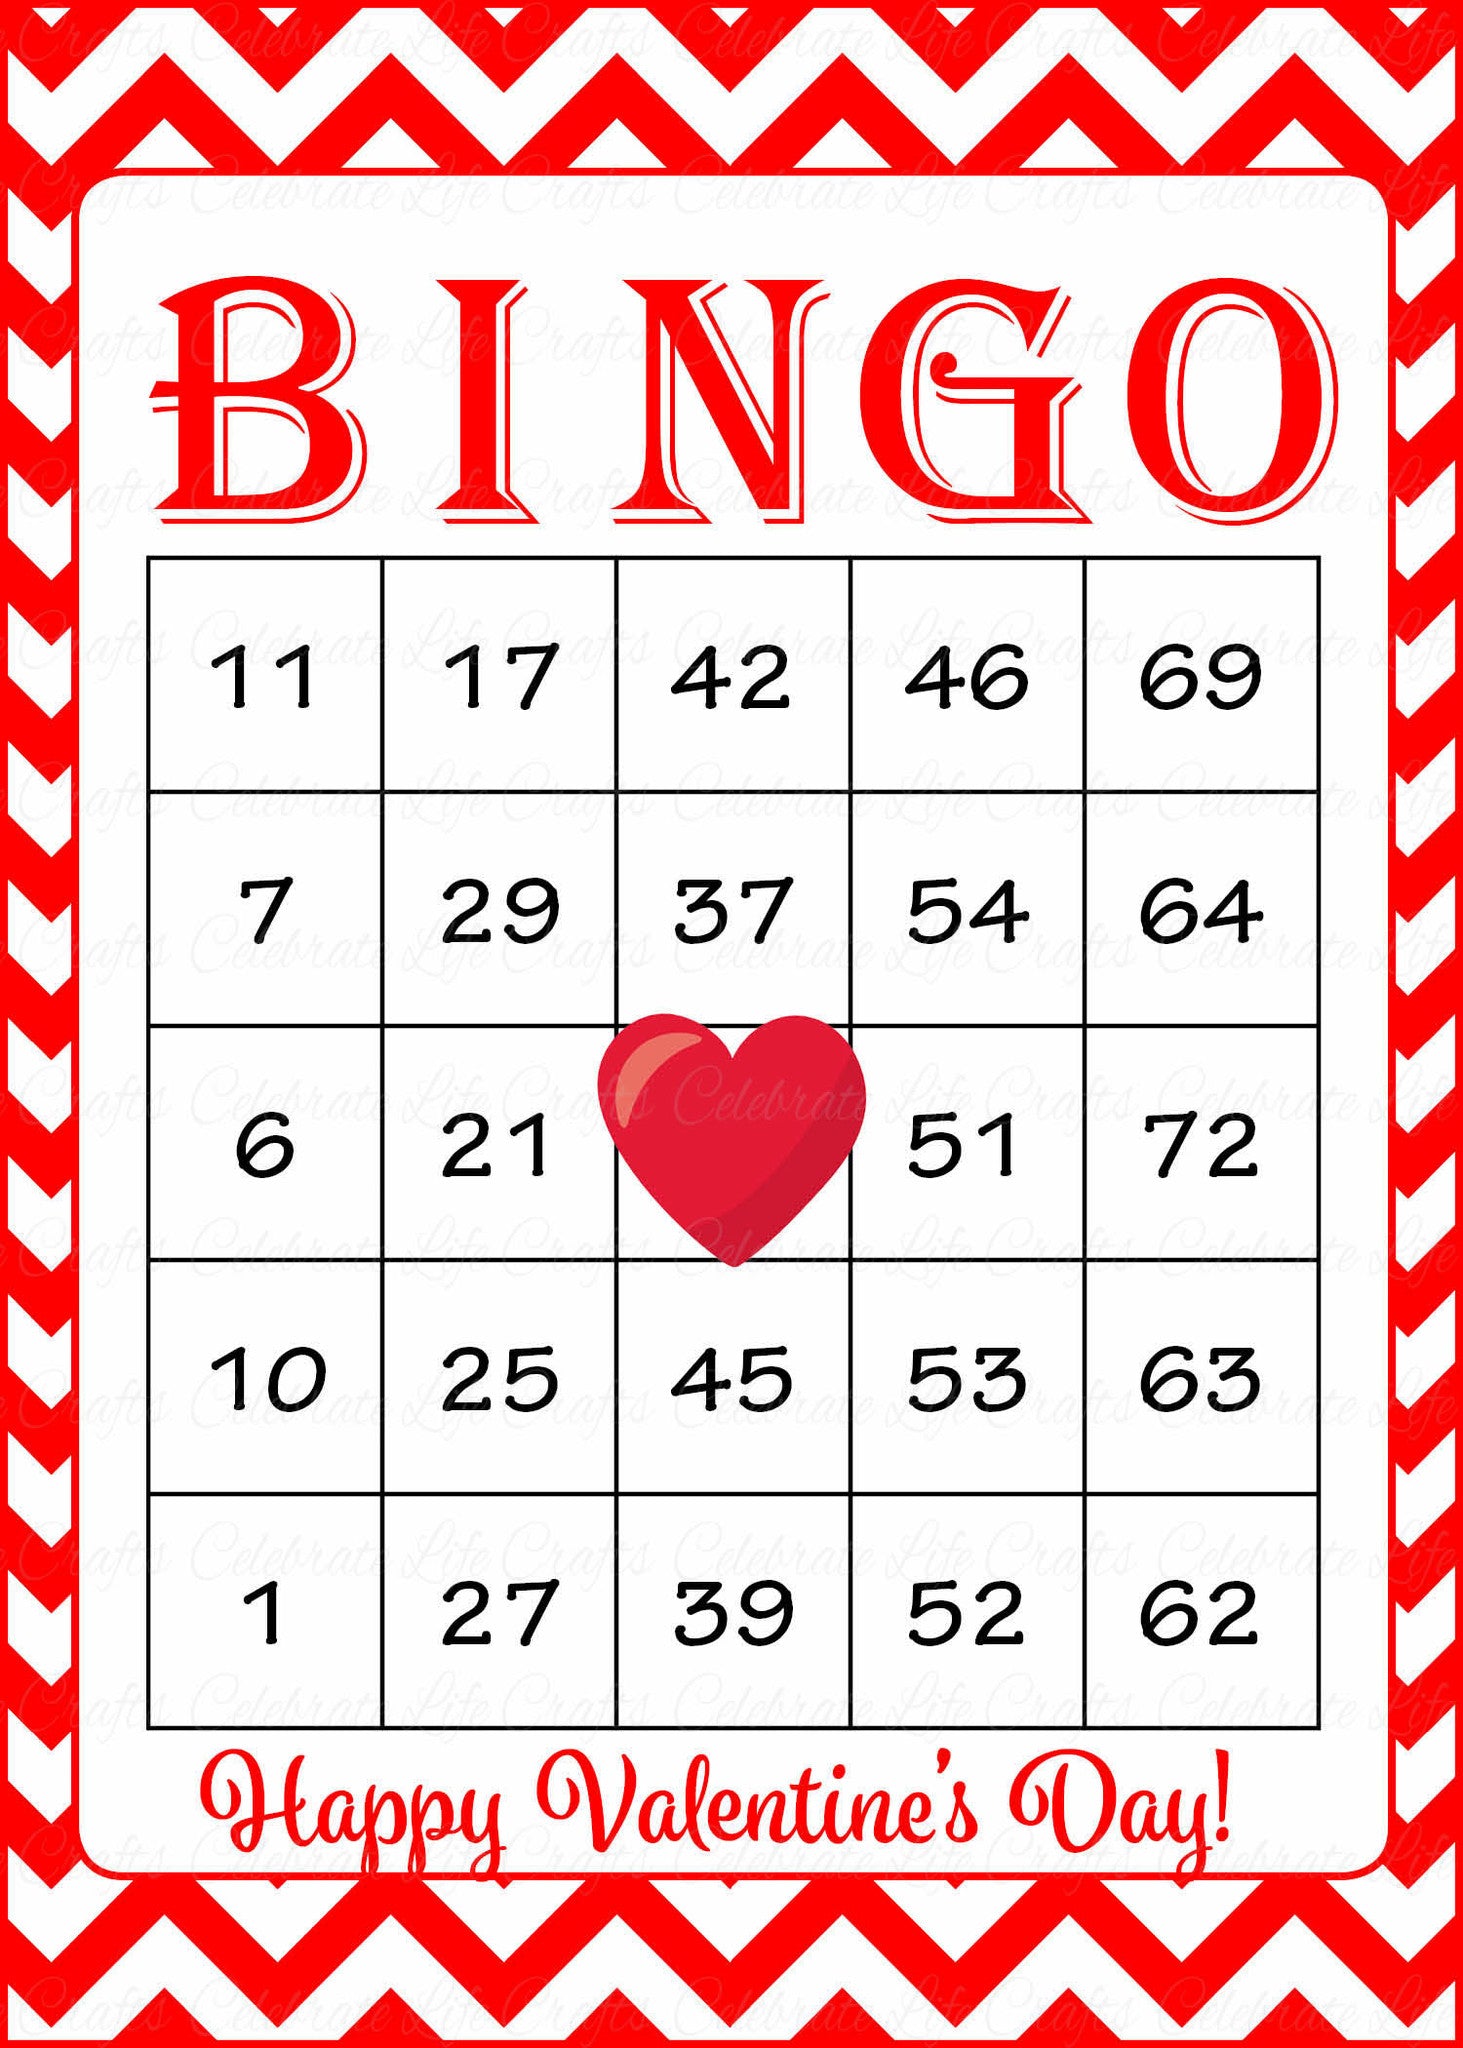 Download Valentine Bingo Game Download for Holiday Party Ideas | Valentine's Day Party Games - Celebrate ...